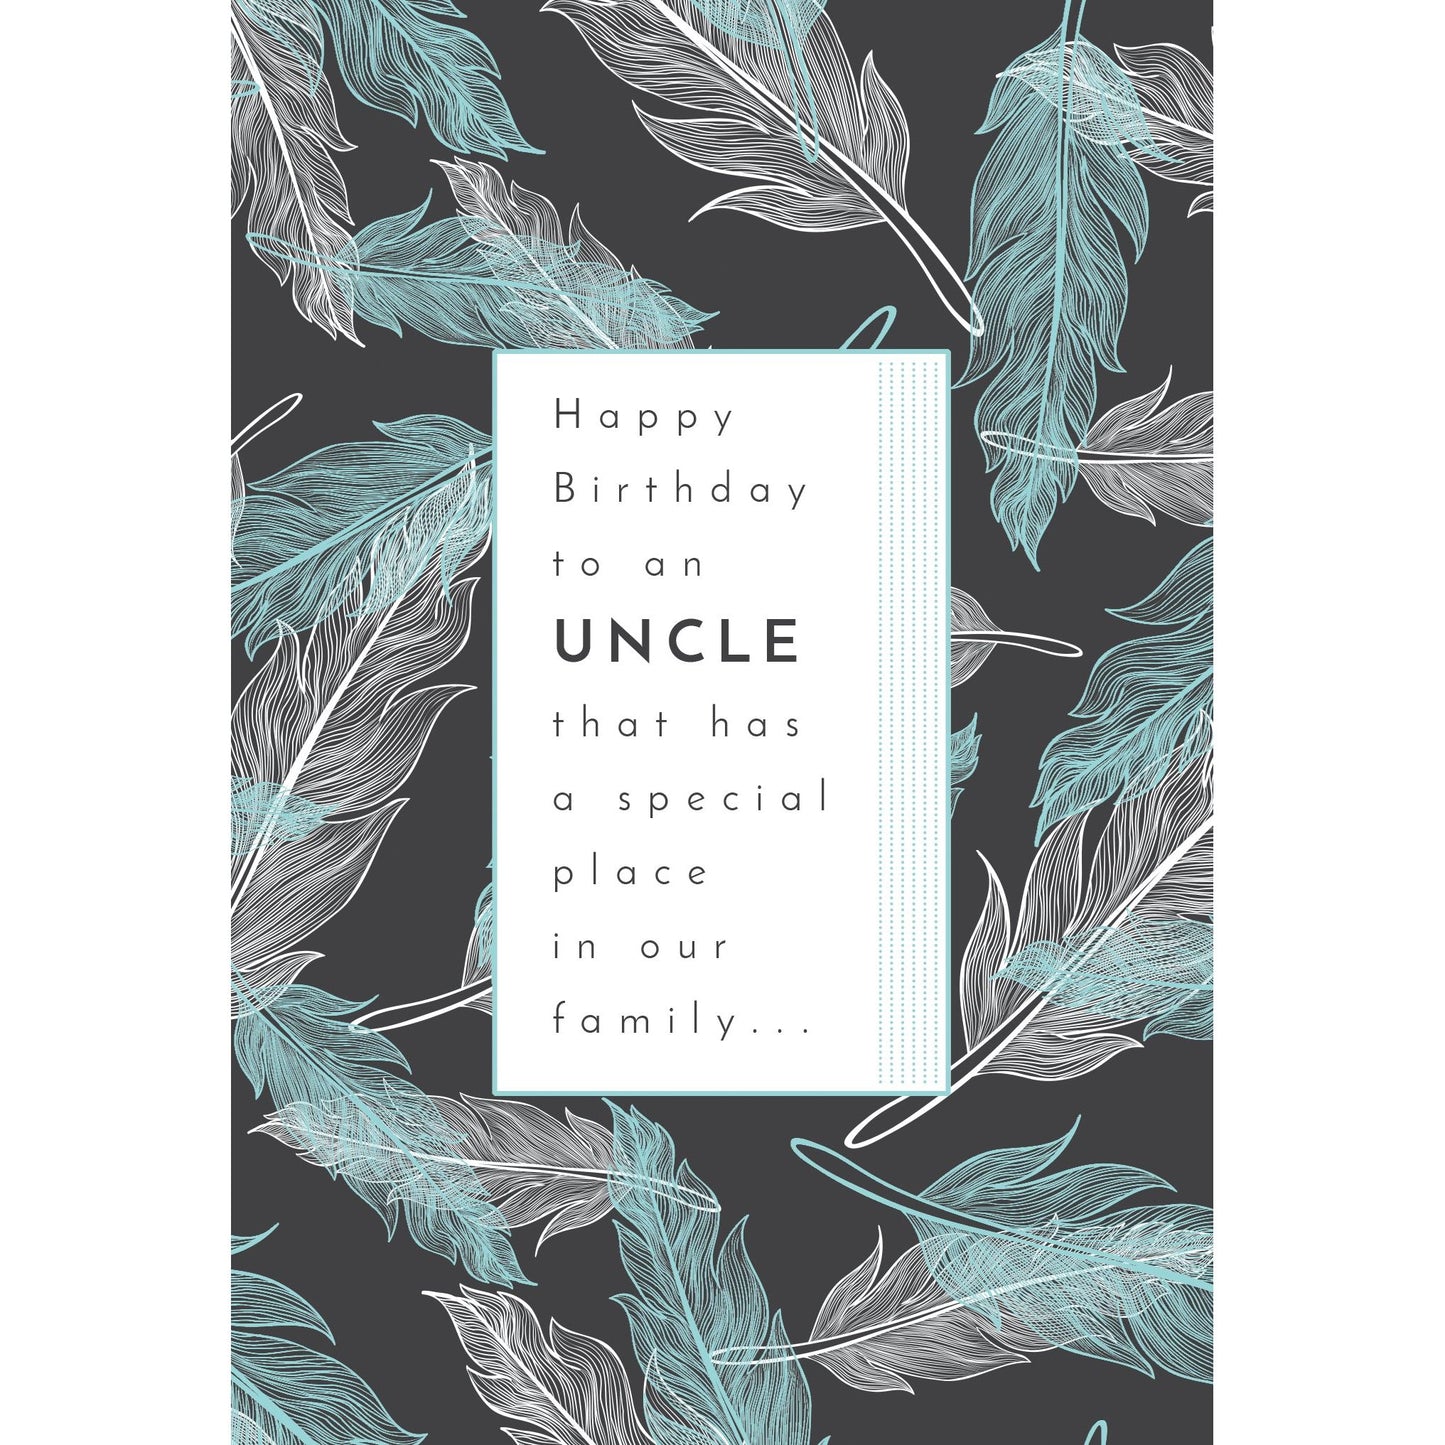 Birthday Uncle Card Special Place in Family - Cardmore